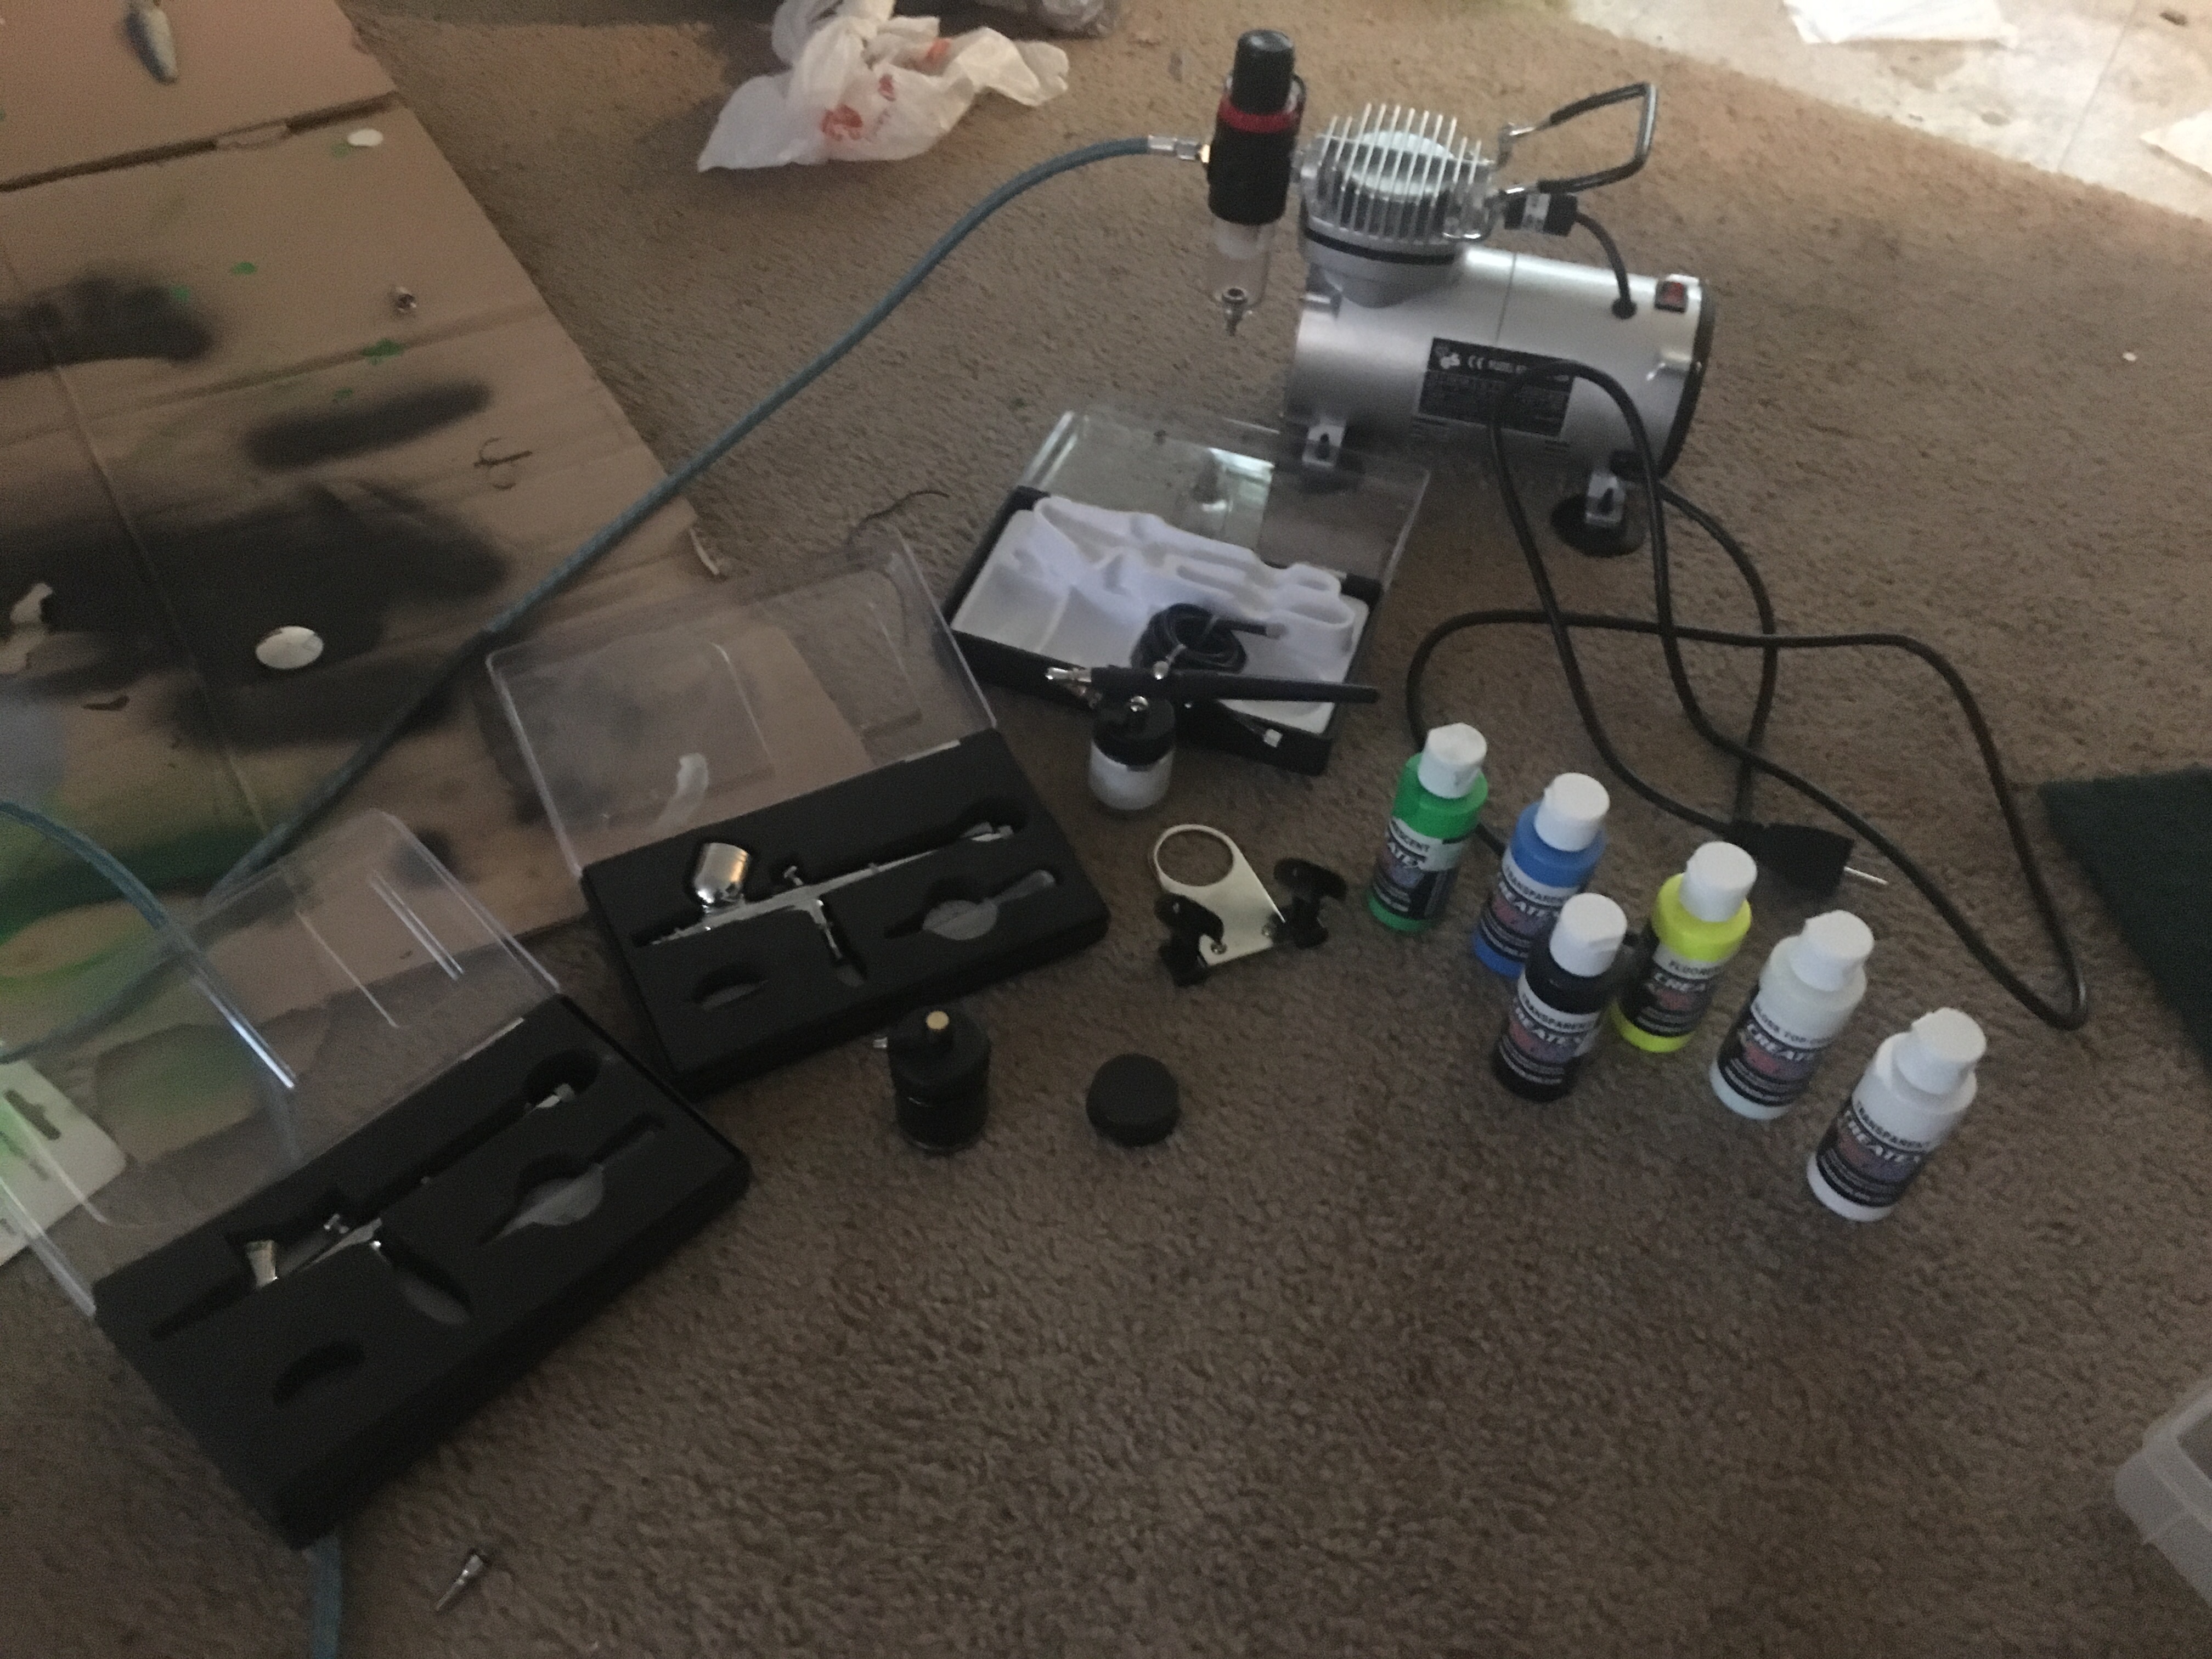 Airbrush kit to paint your own lures - Classifieds - Buy, Sell